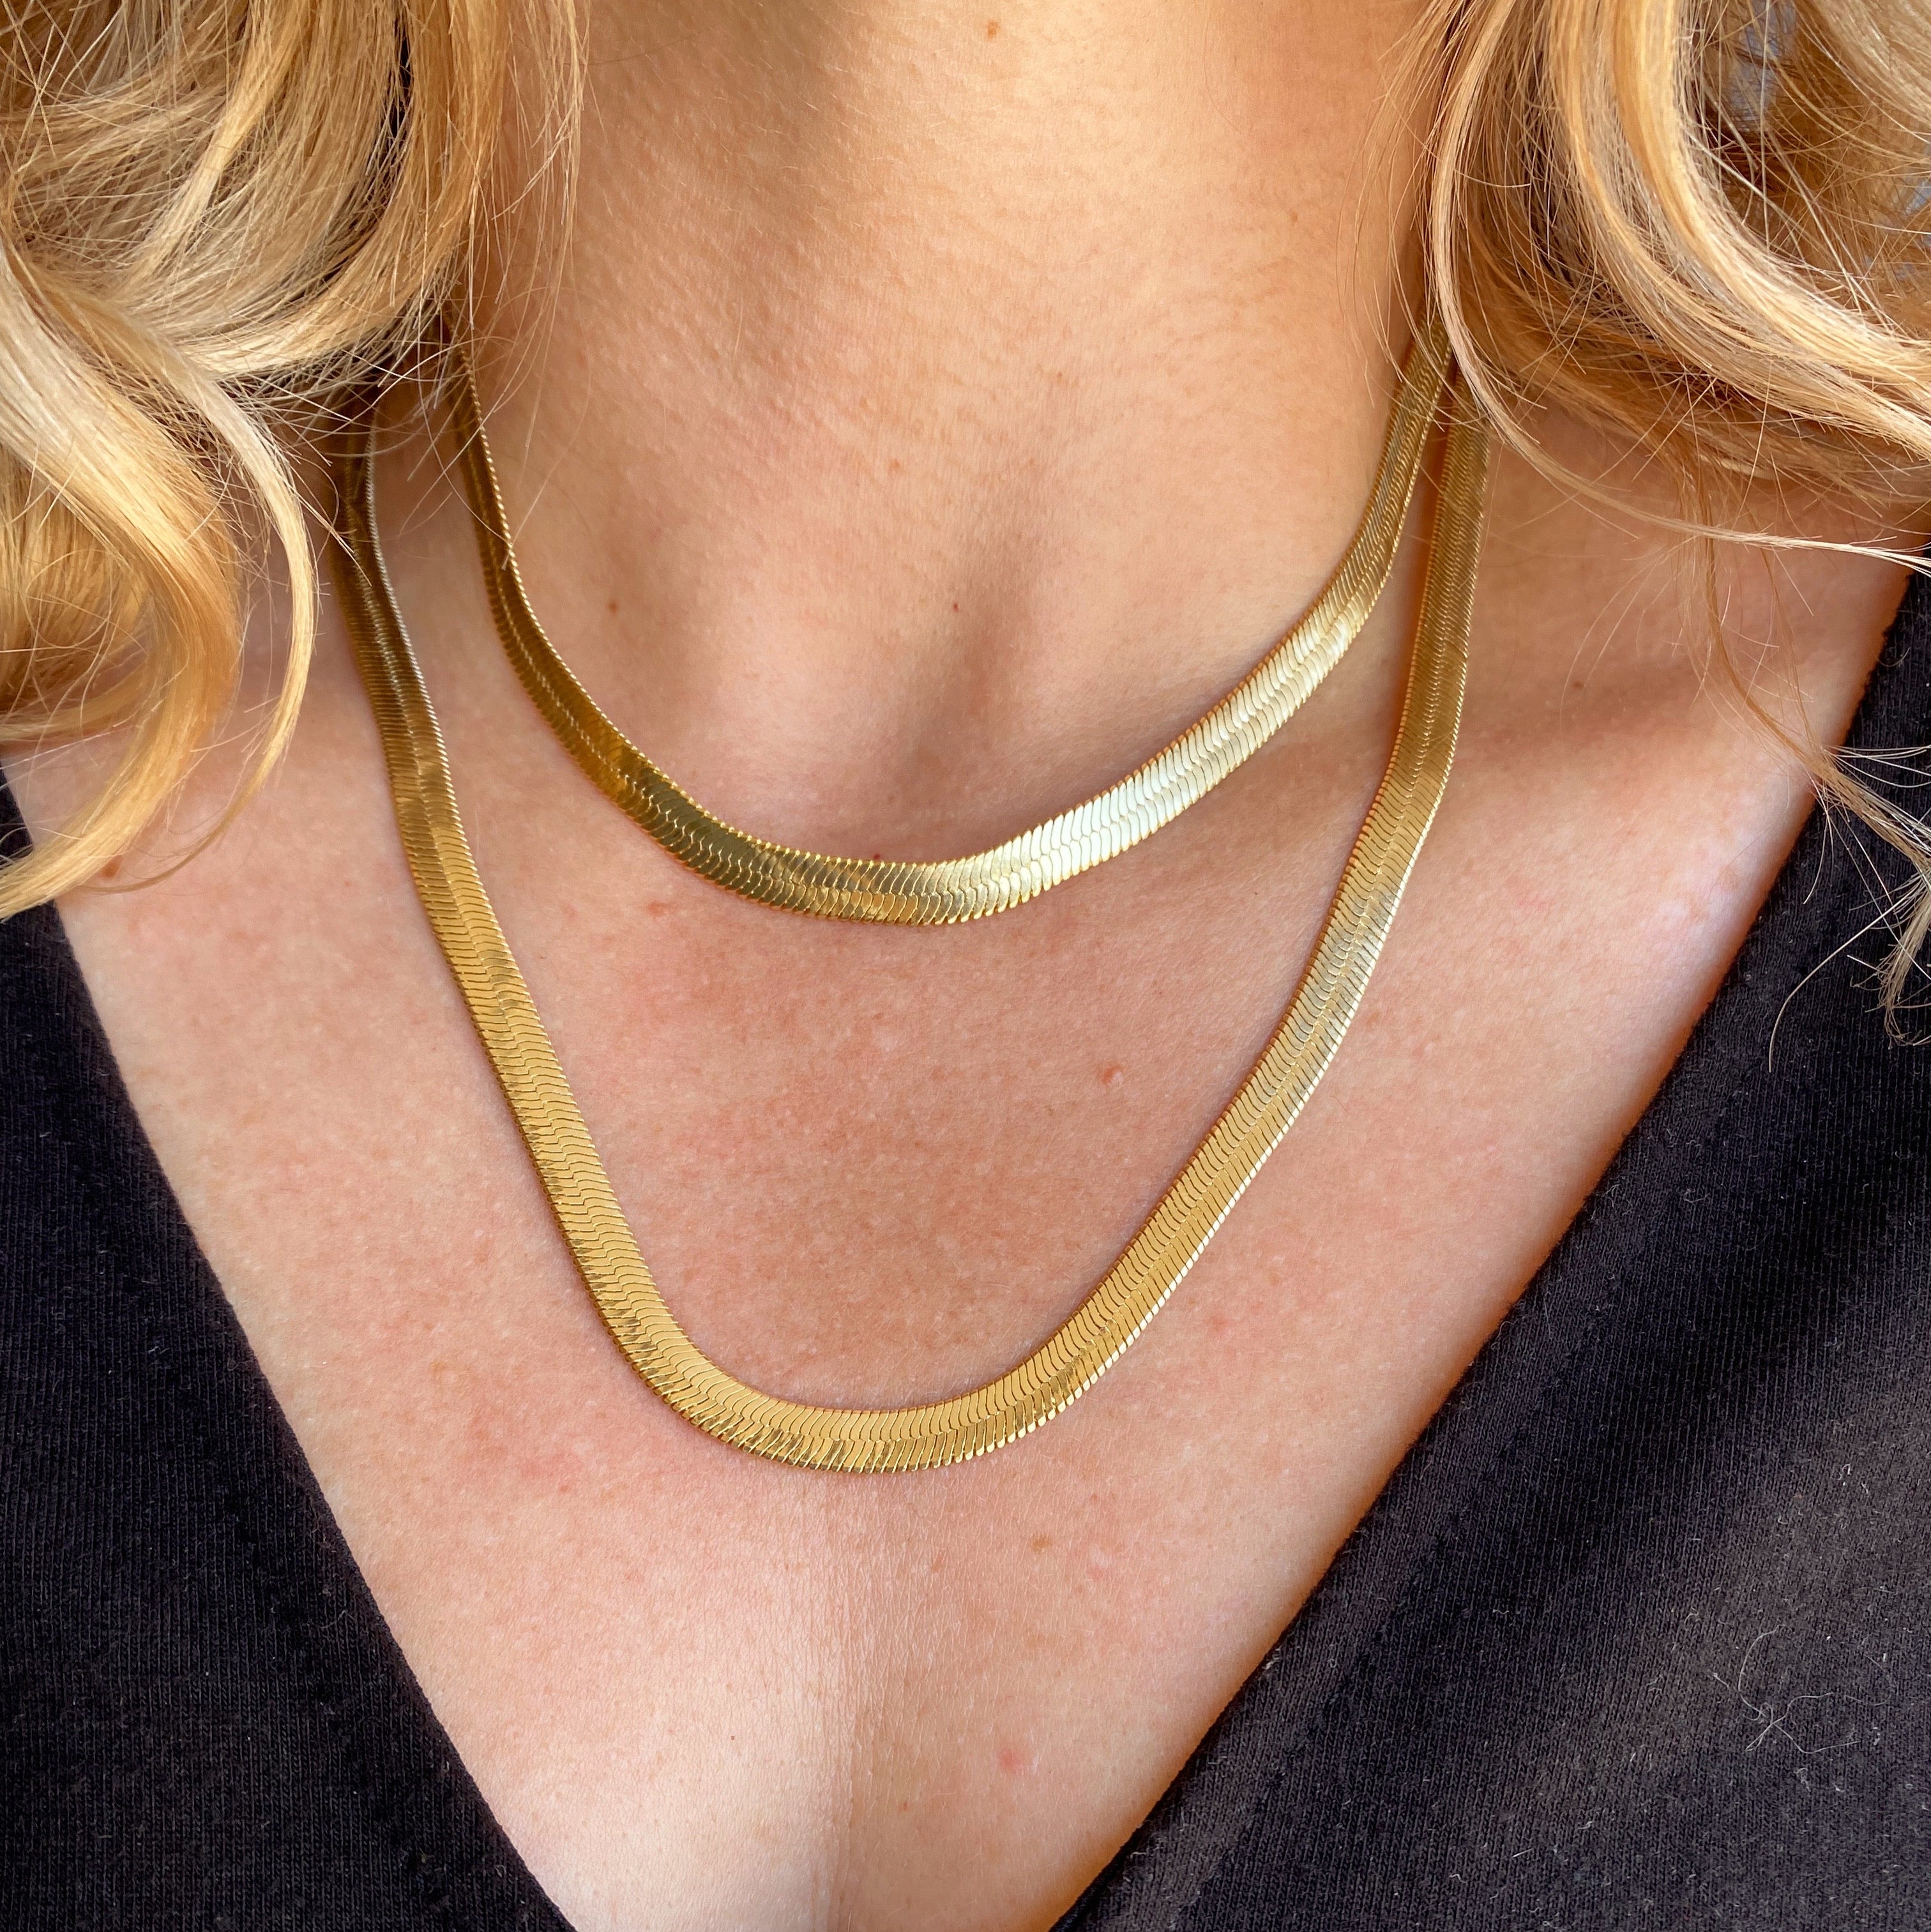 Solid 18K Gold Herringbone Necklace, Shiny 18KT Solid 750 2.5mm Herringbone  Chain Necklace, 18KT Gold Chain, 18KT Liquid Link Gold Chain - Etsy